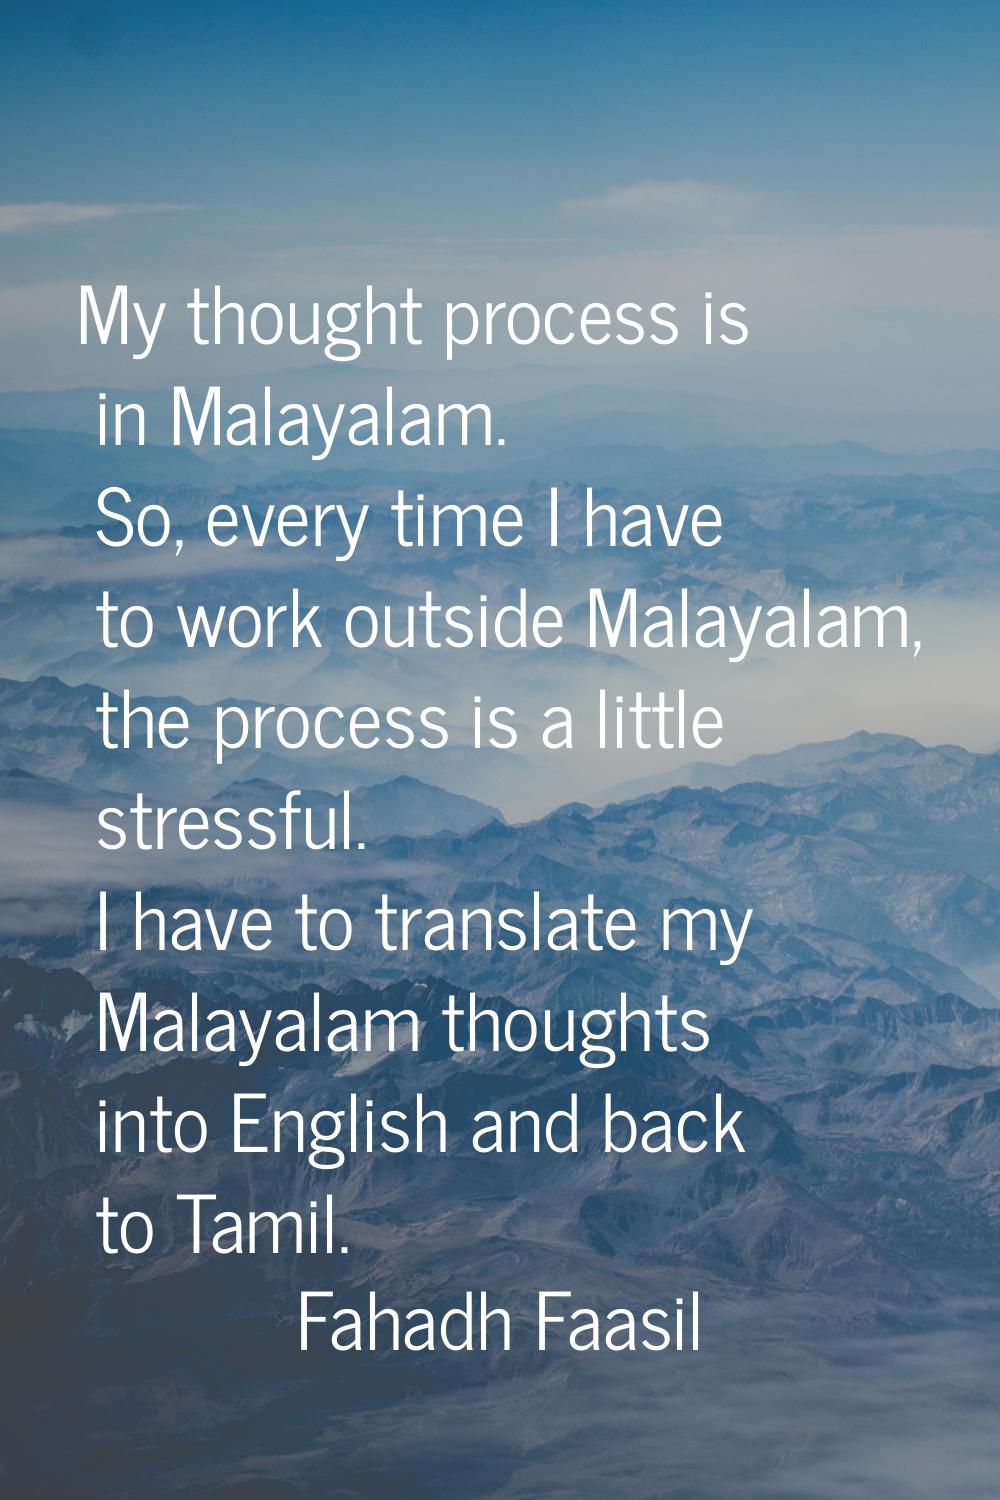 My thought process is in Malayalam. So, every time I have to work outside Malayalam, the process is